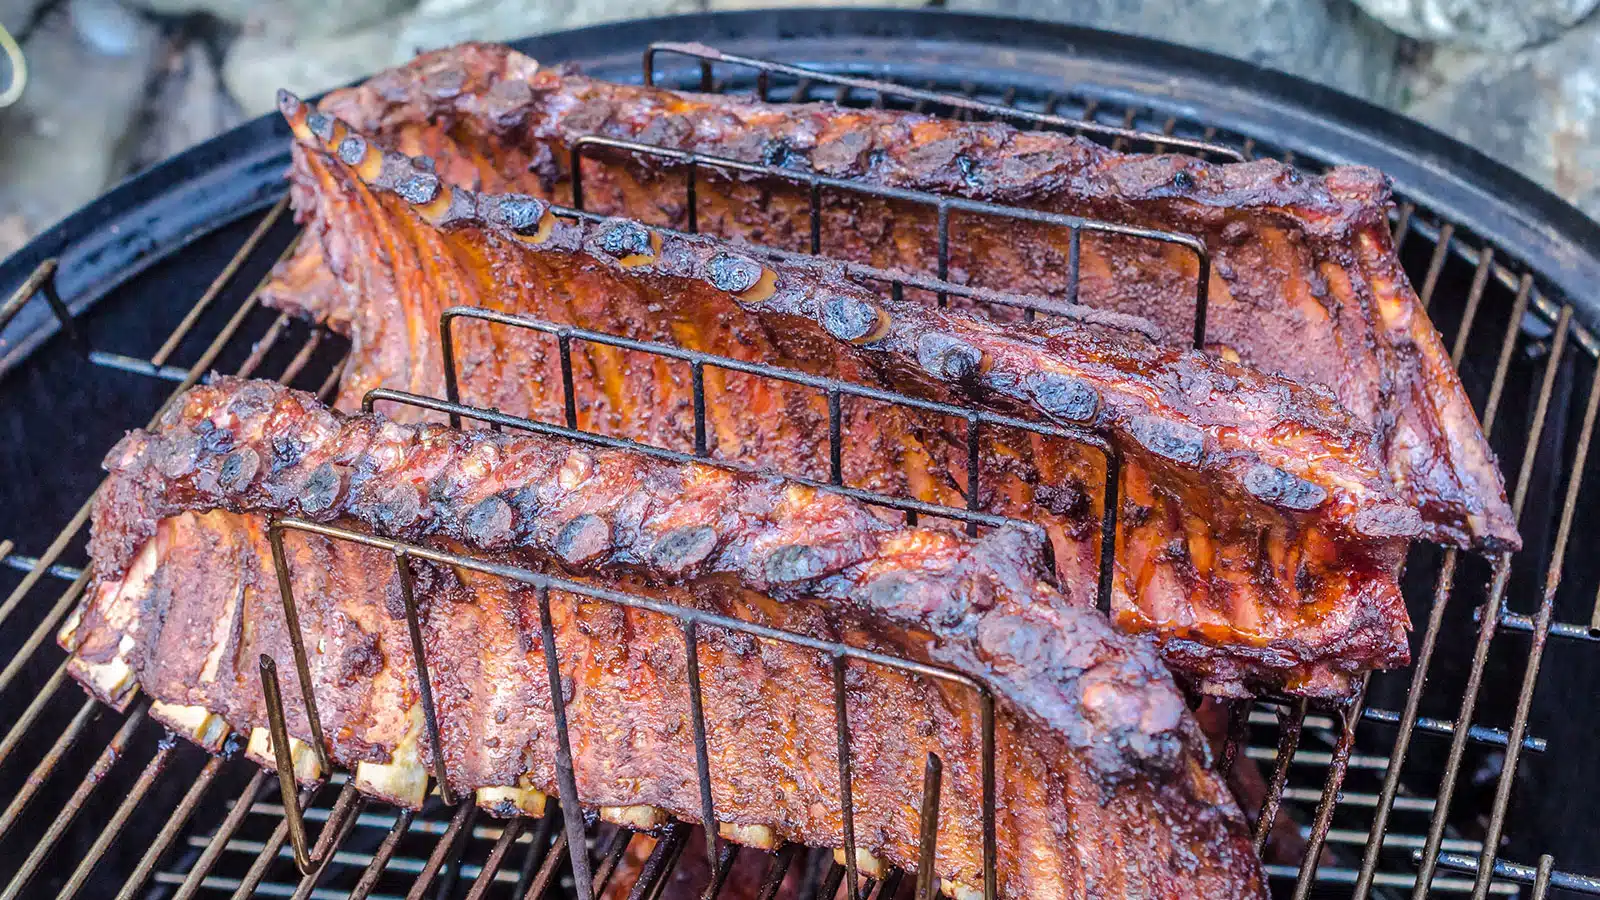 Catering - Smoked St. Louis Ribs from Frazie's Meat & Market